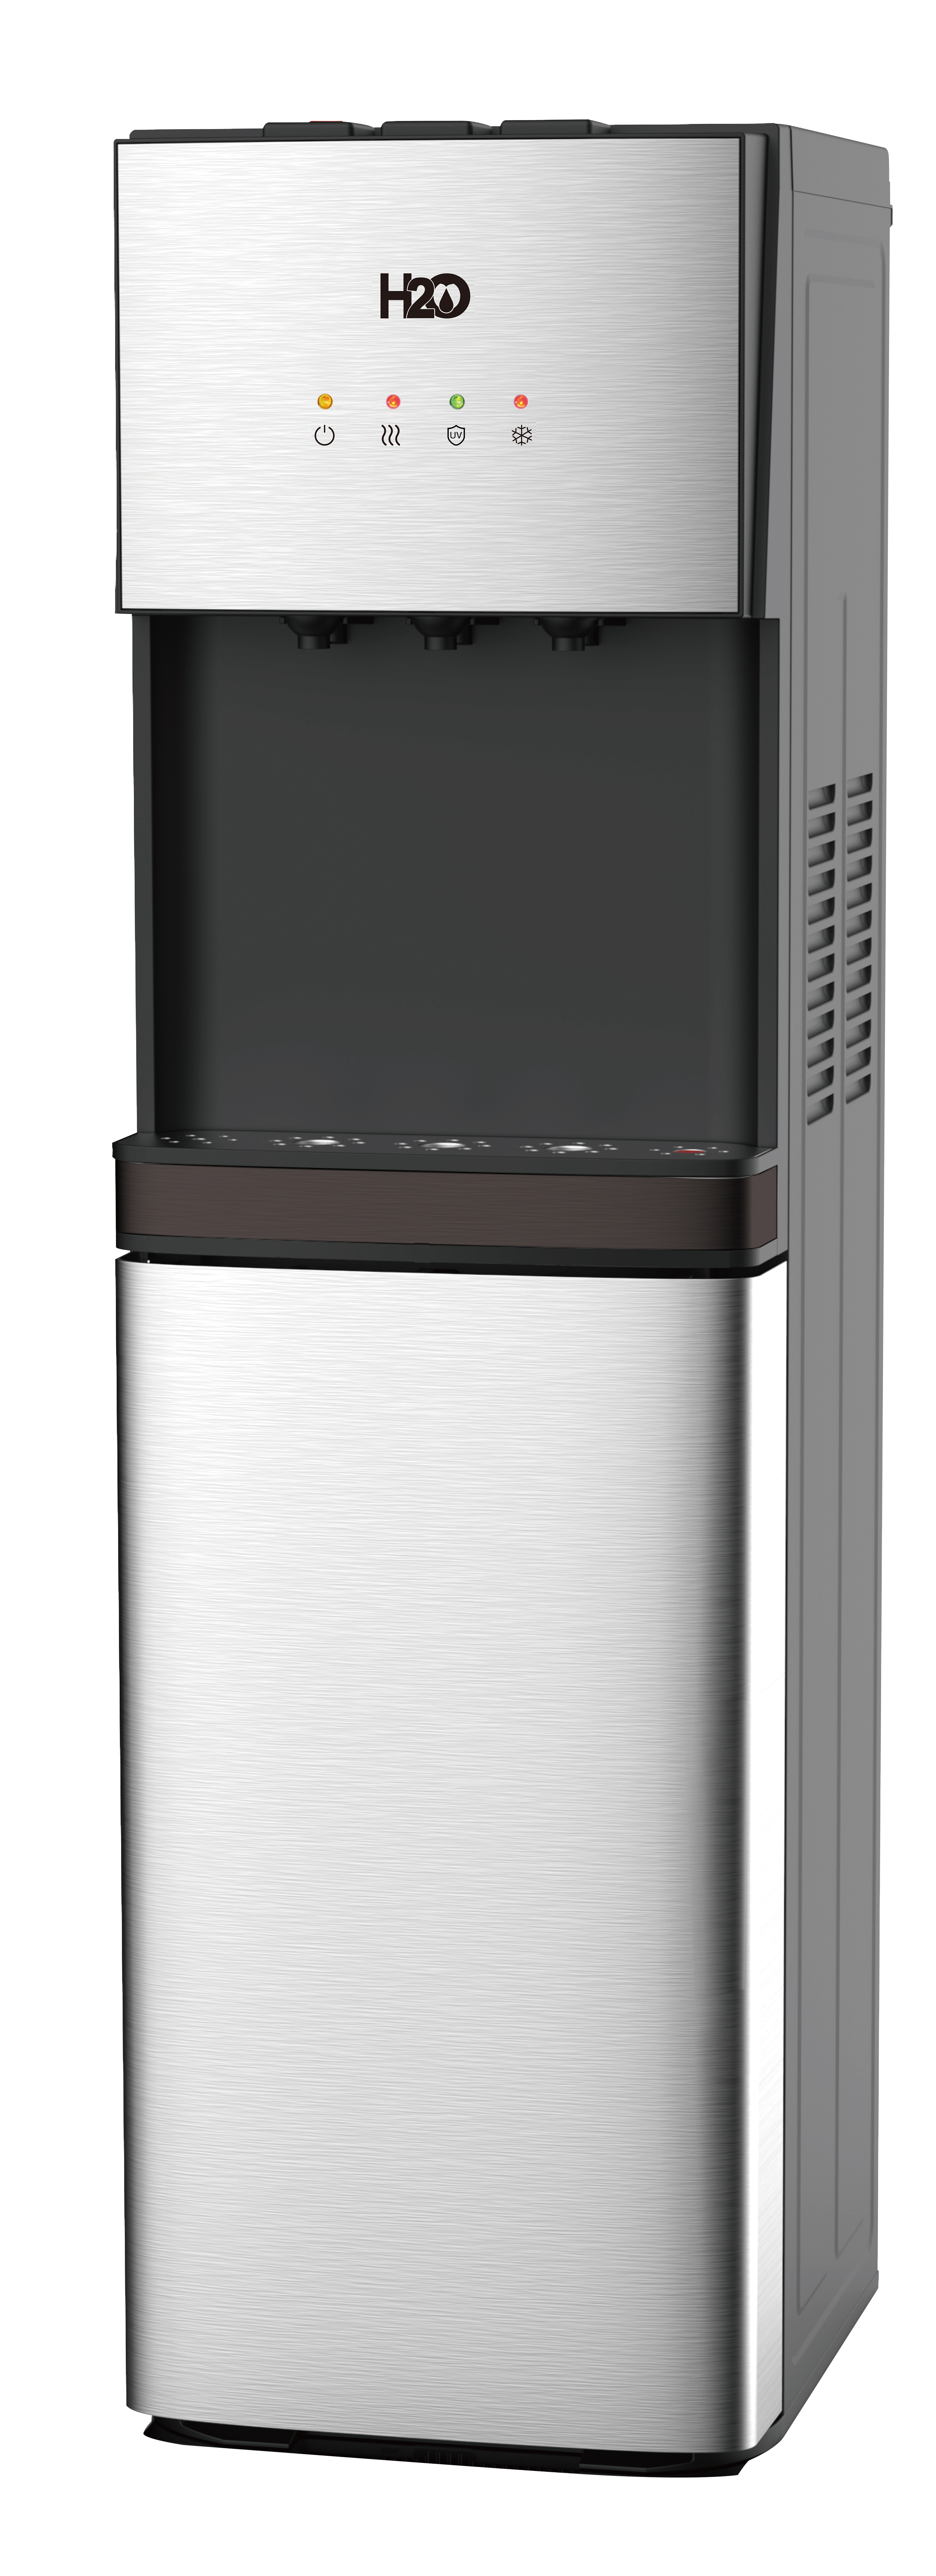 H2O-96UT UV Self-Cleaning Bottom Load Water Dispenser in Black with 40-48° F Cold Water Temperature, h2o - image 1 of 10